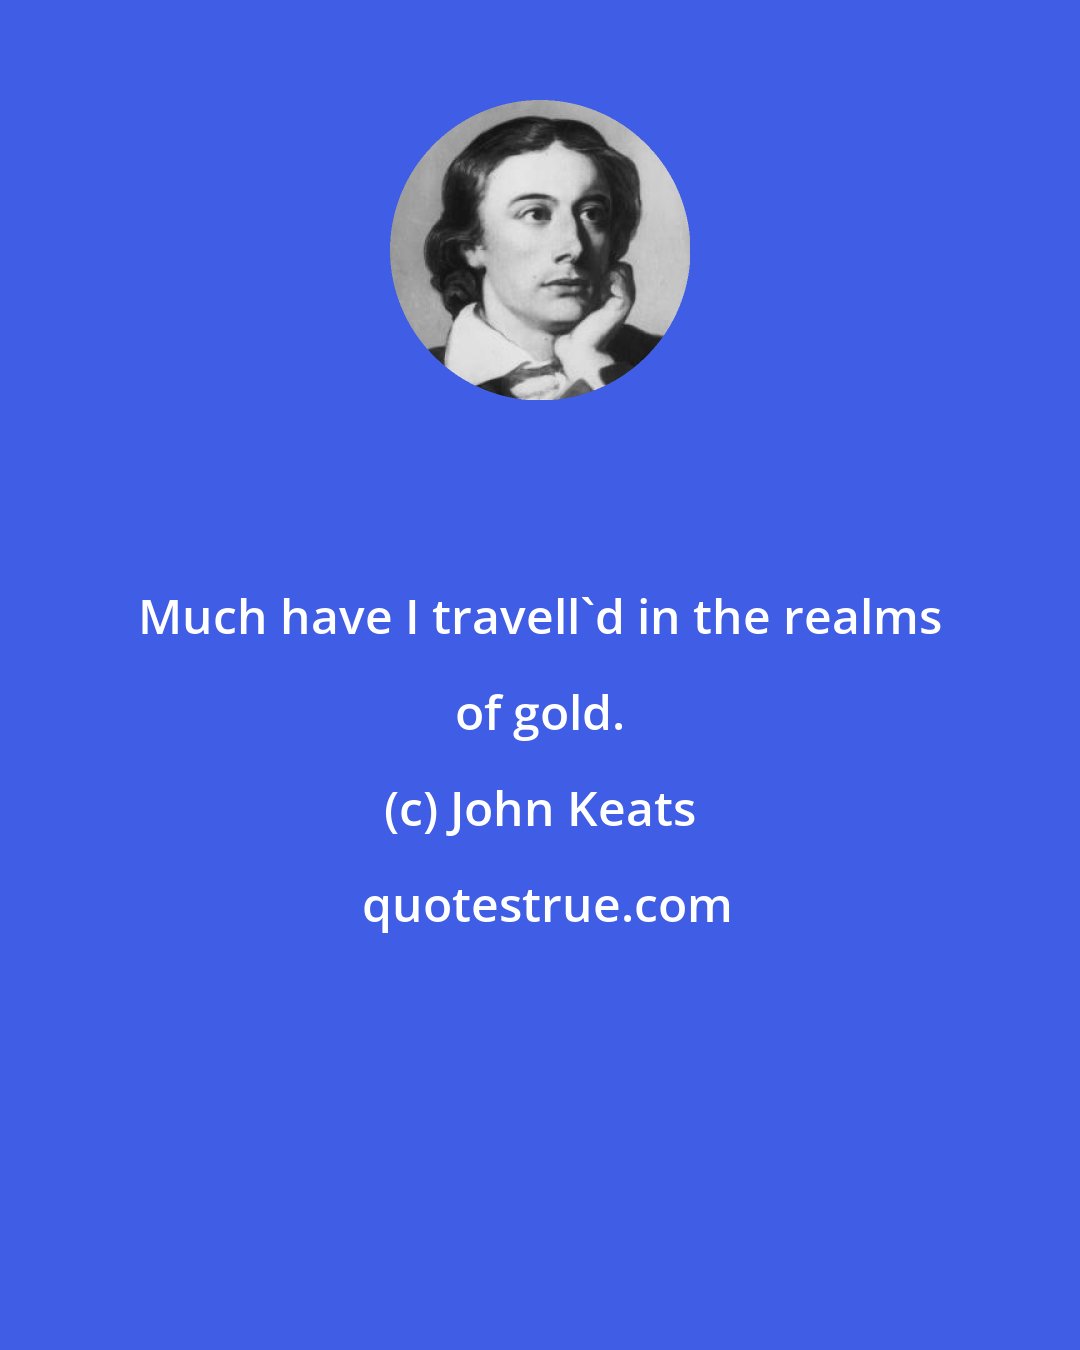 John Keats: Much have I travell'd in the realms of gold.